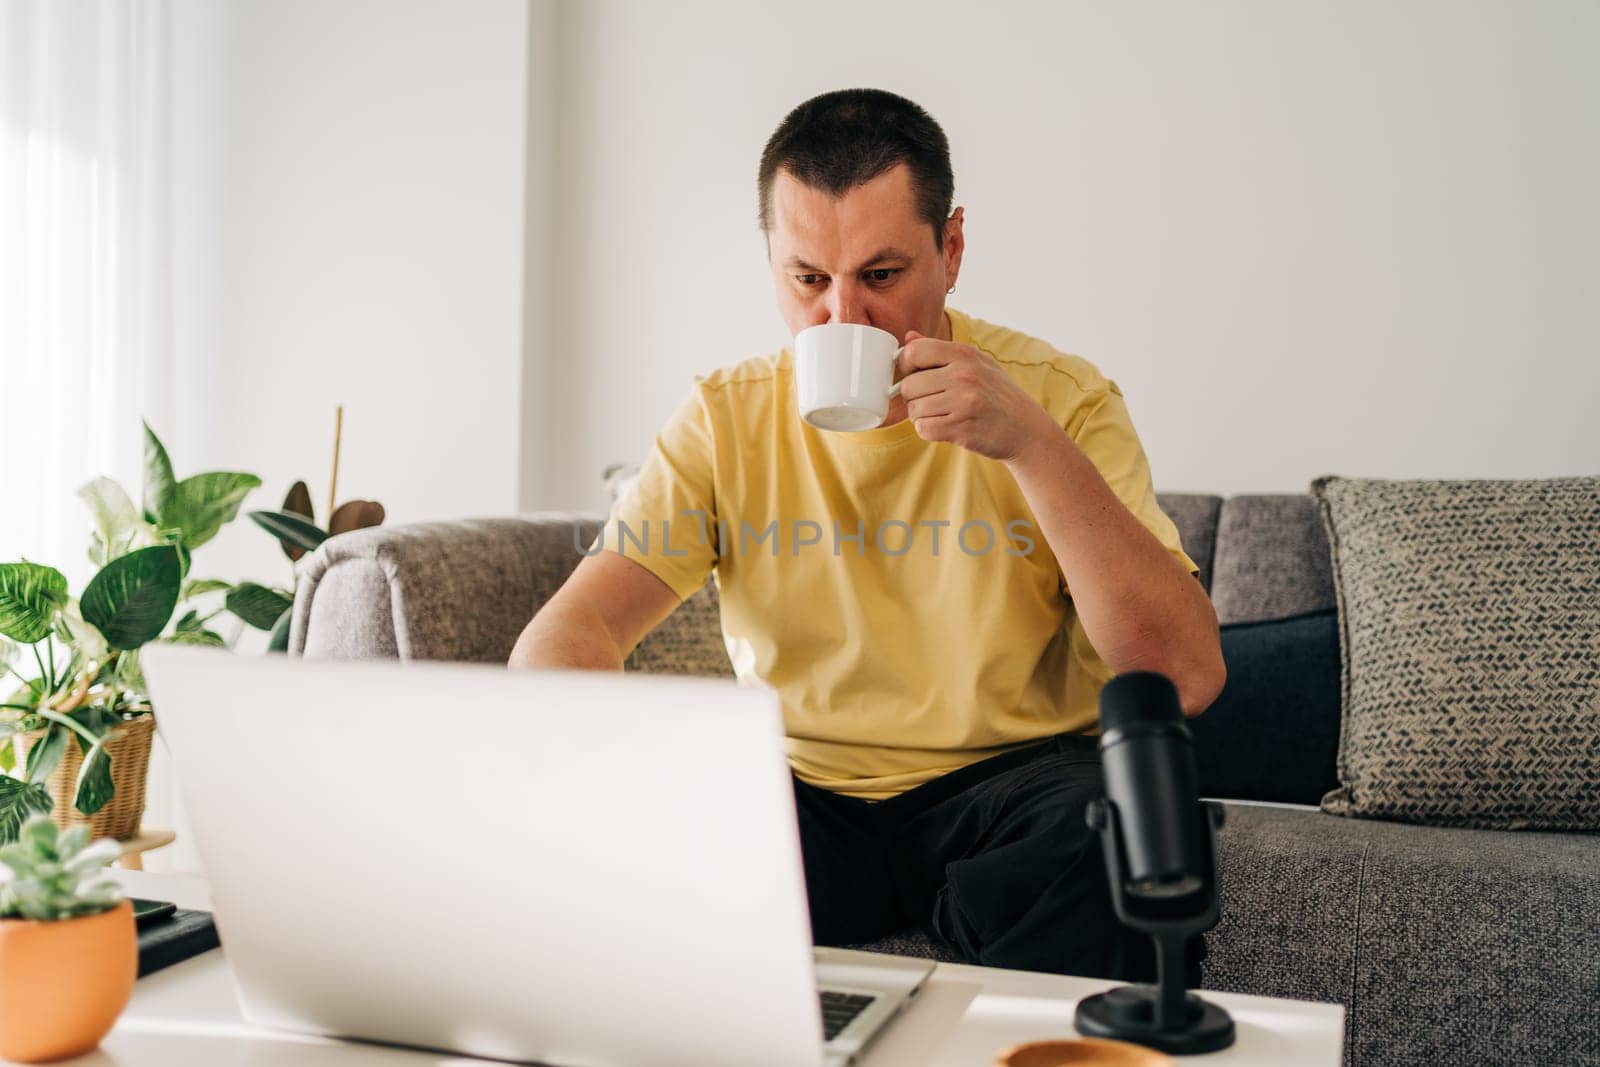 IT freelancer men with microphone typing in laptop working from home office. Programmers sitting on couch doing code review. Distance learning online education and work.